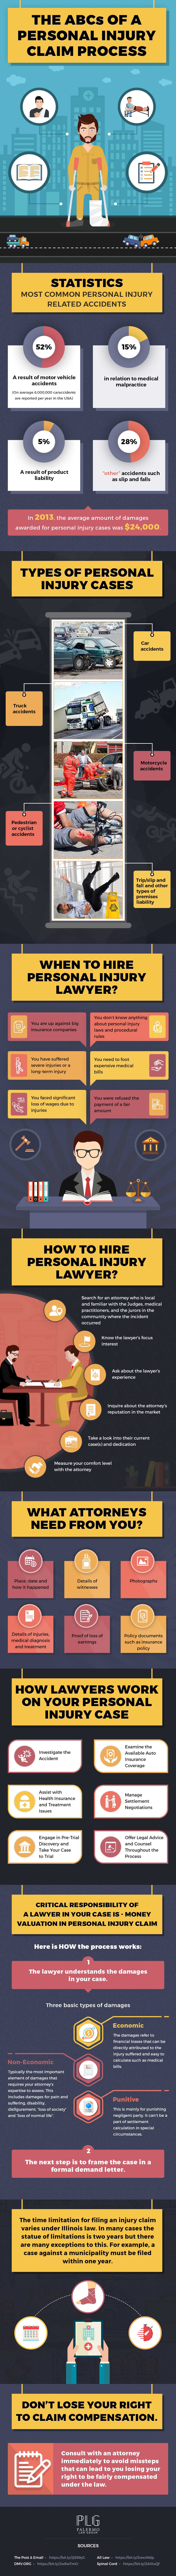 The ABCs of a Personal Injury Claim Process